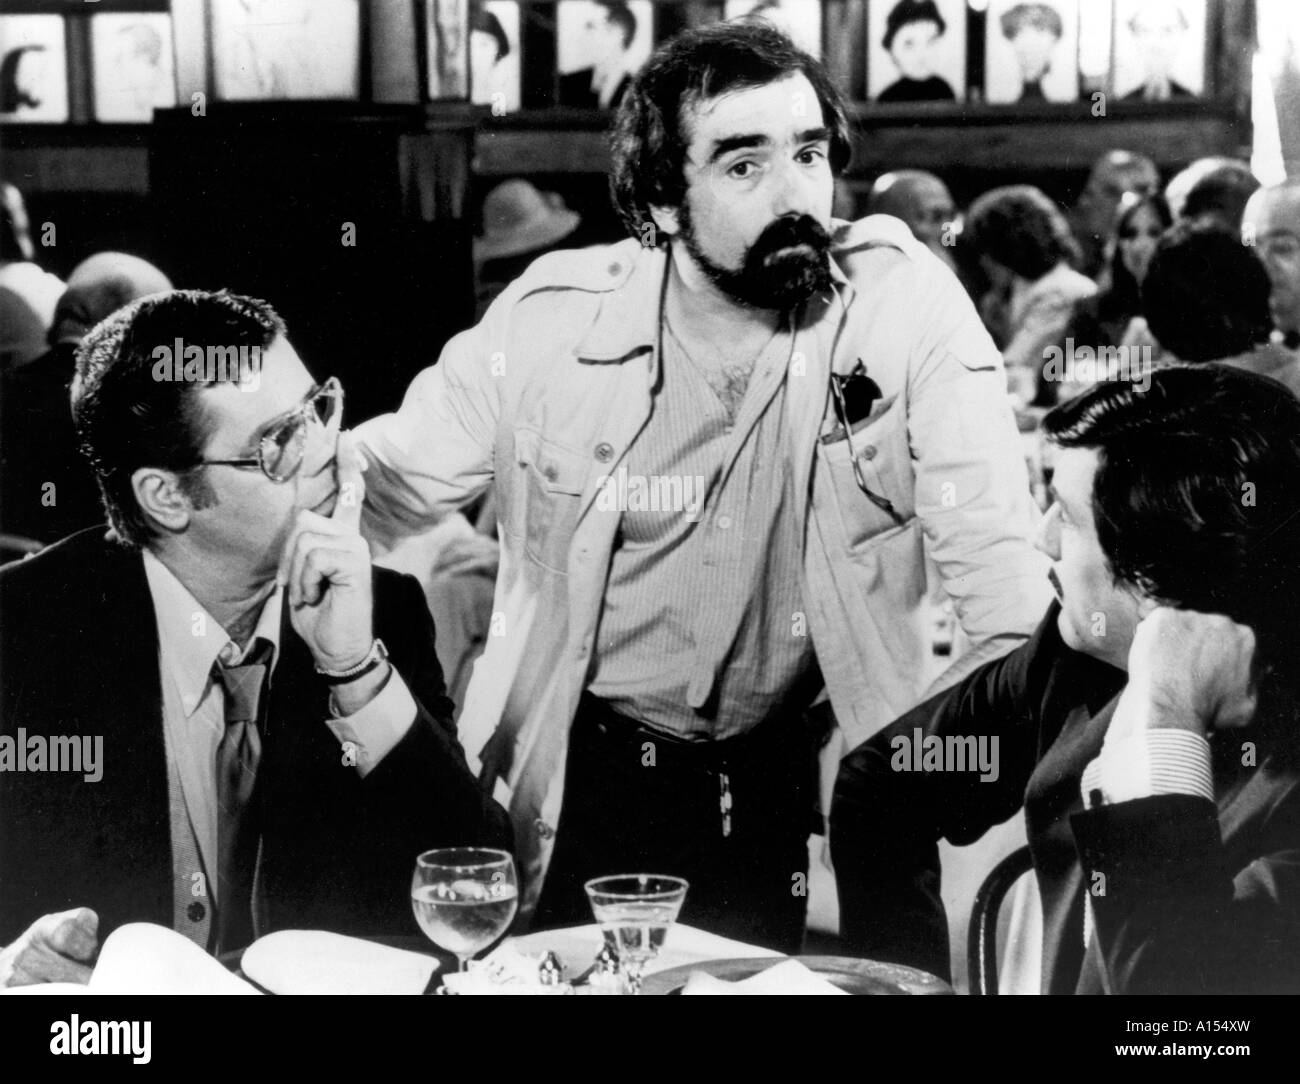 The King Of Comedy Year 1983 Director Martin Scorsese Robert DeNiro Jerry Lewis Martin Scorsese Shooting picture Stock Photo